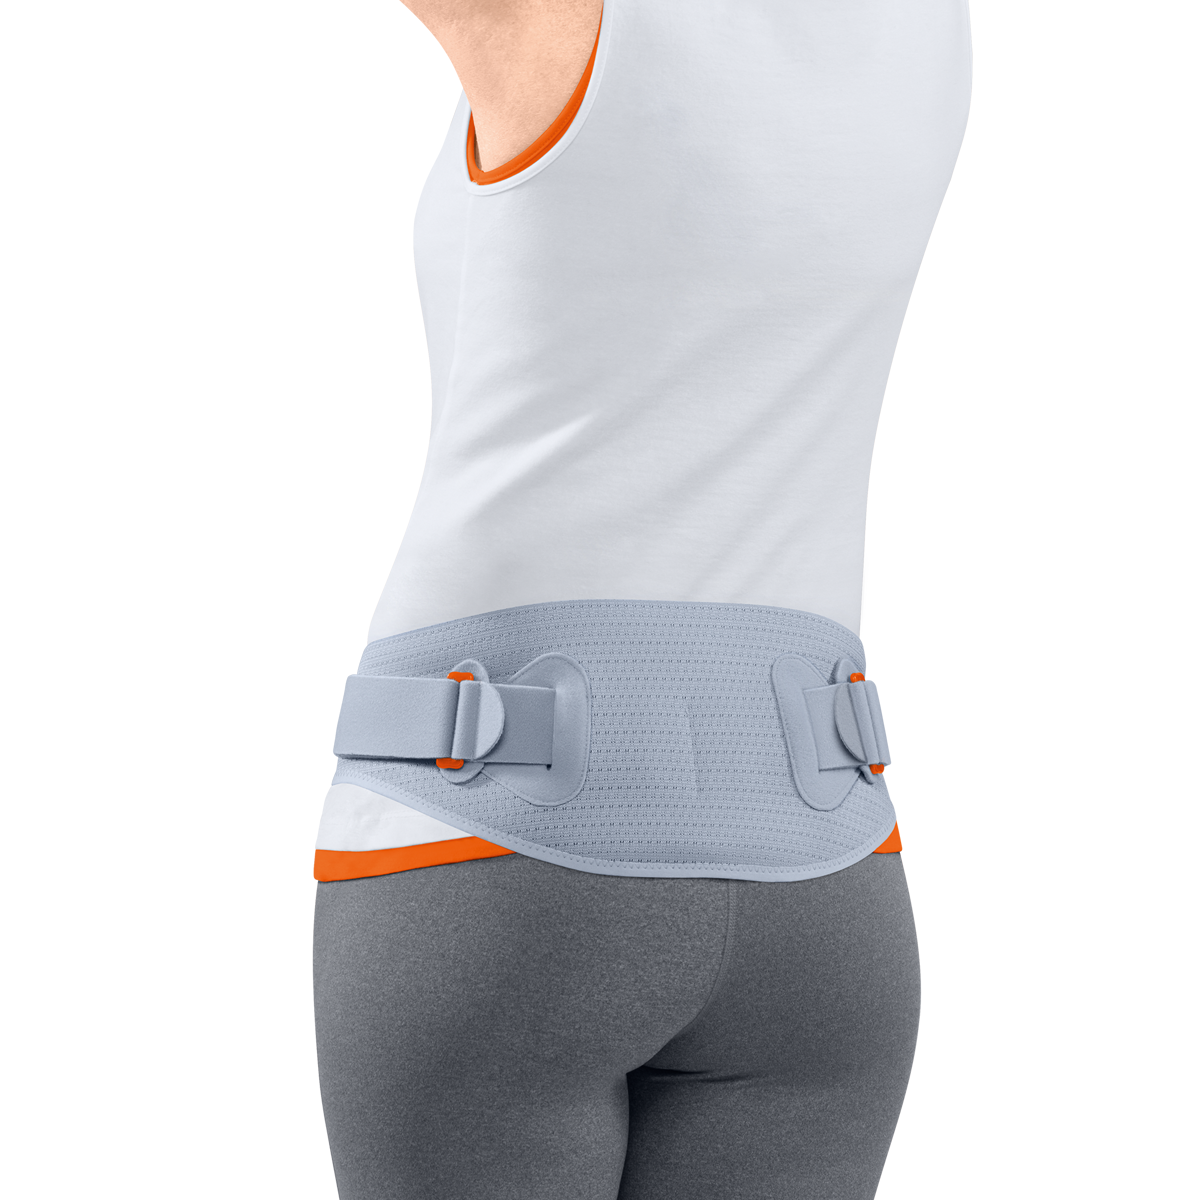 Workout Back Brace for Lower Back Support, Сompression & Pain Relief, L Size